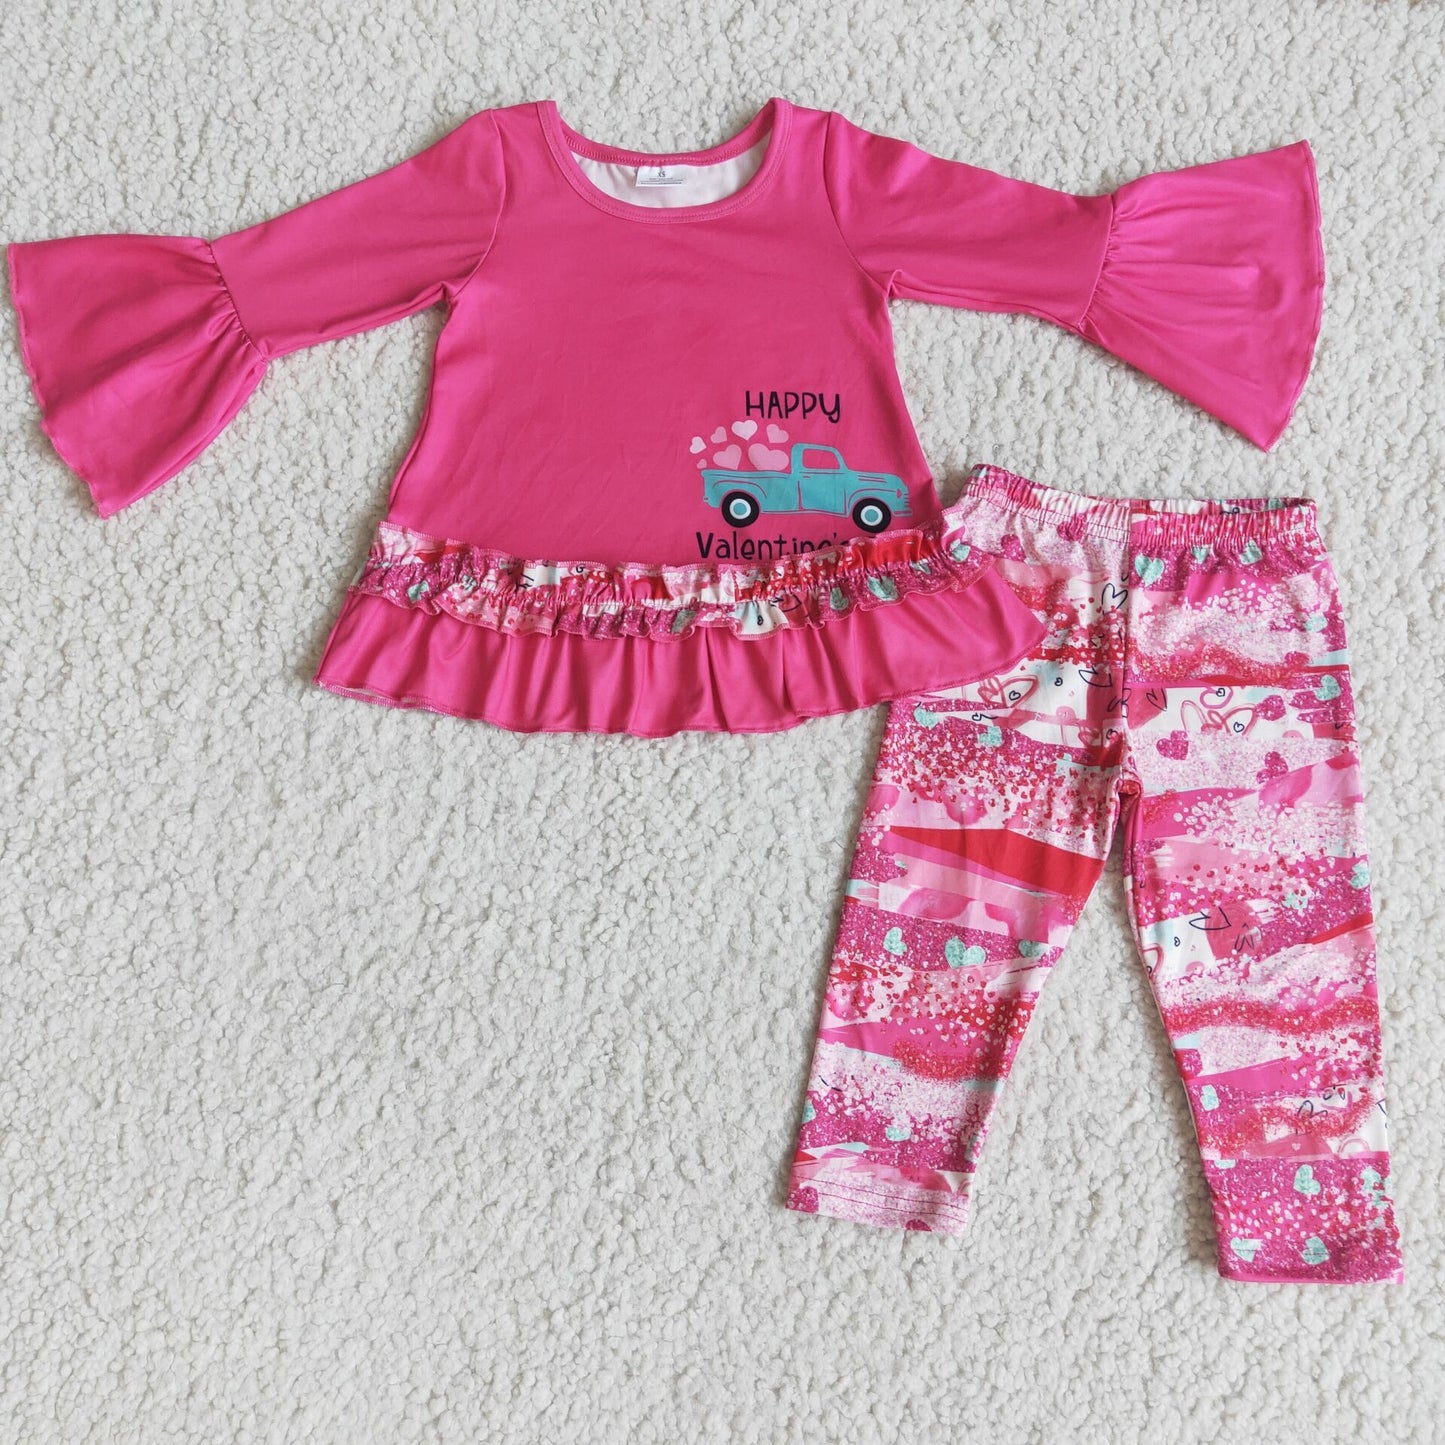 Happy valentine's shirt leggings baby girls cute outfits